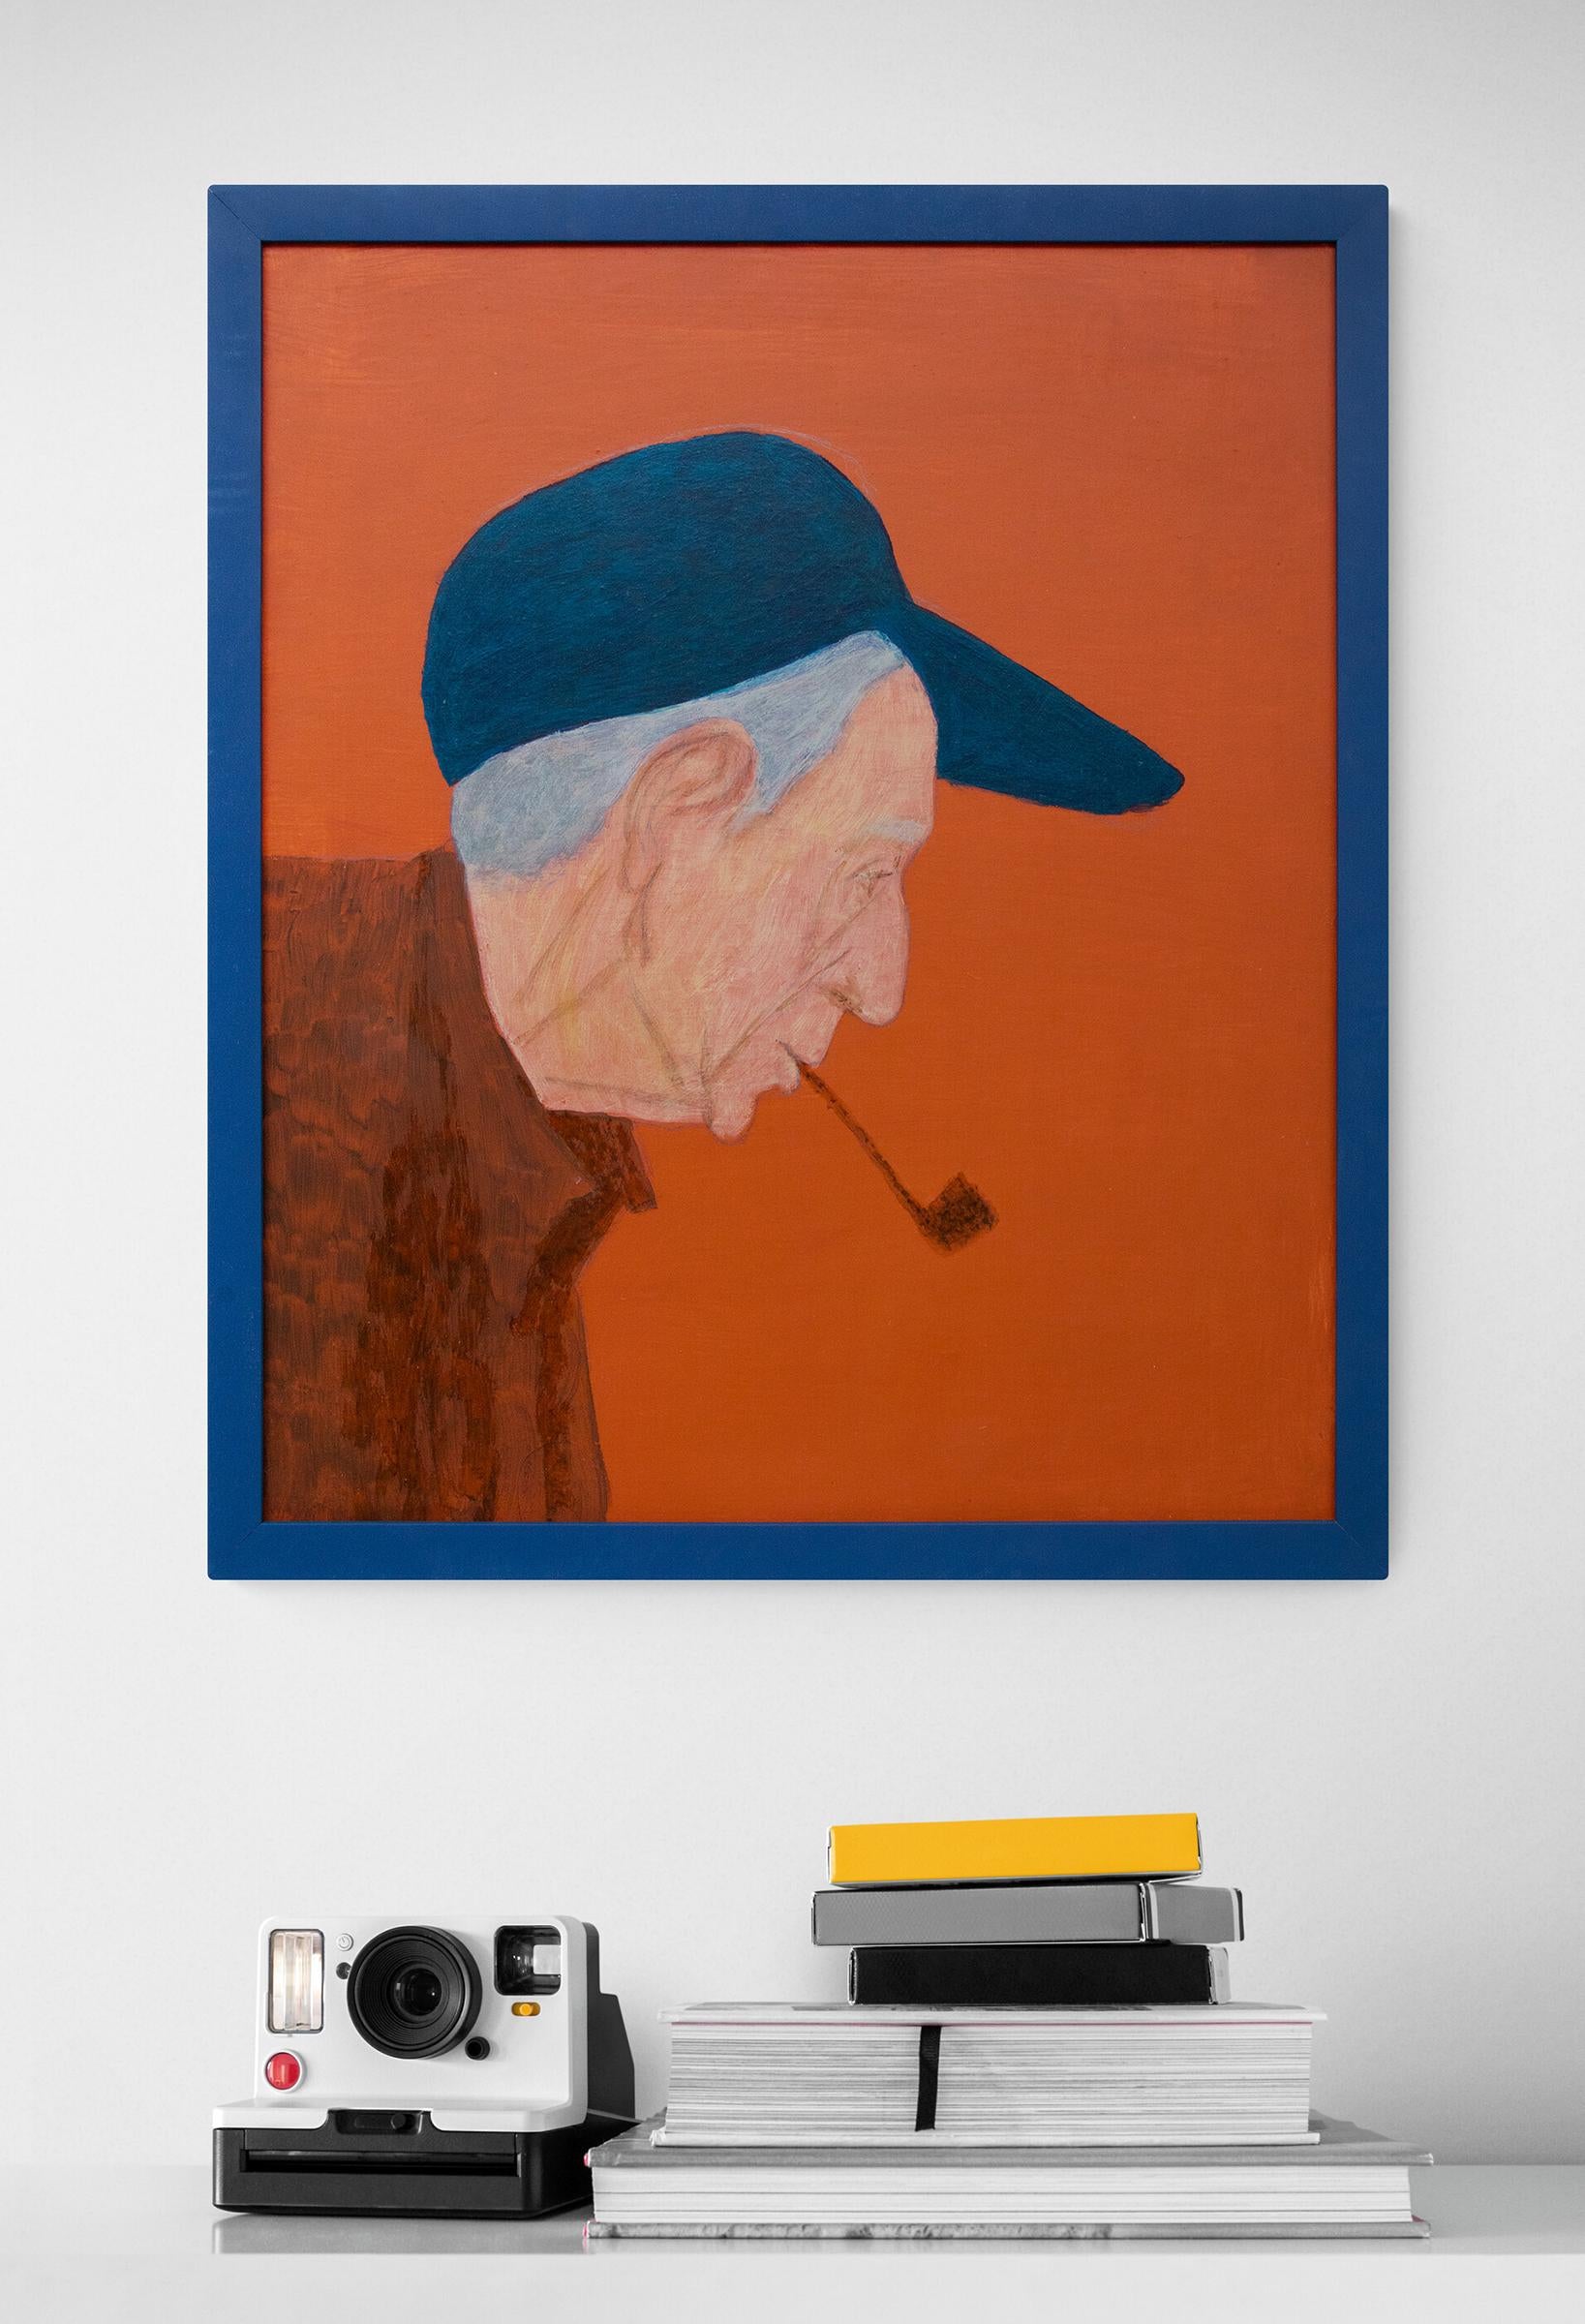 Vintage original painting by 20th century Chicago/Manhattan woman artist, Margo Hoff.  The untitled painting is of an older man with gray hair shown in profile with an orange background. The man bears a resemblance to Norman Rockwell and is wearing